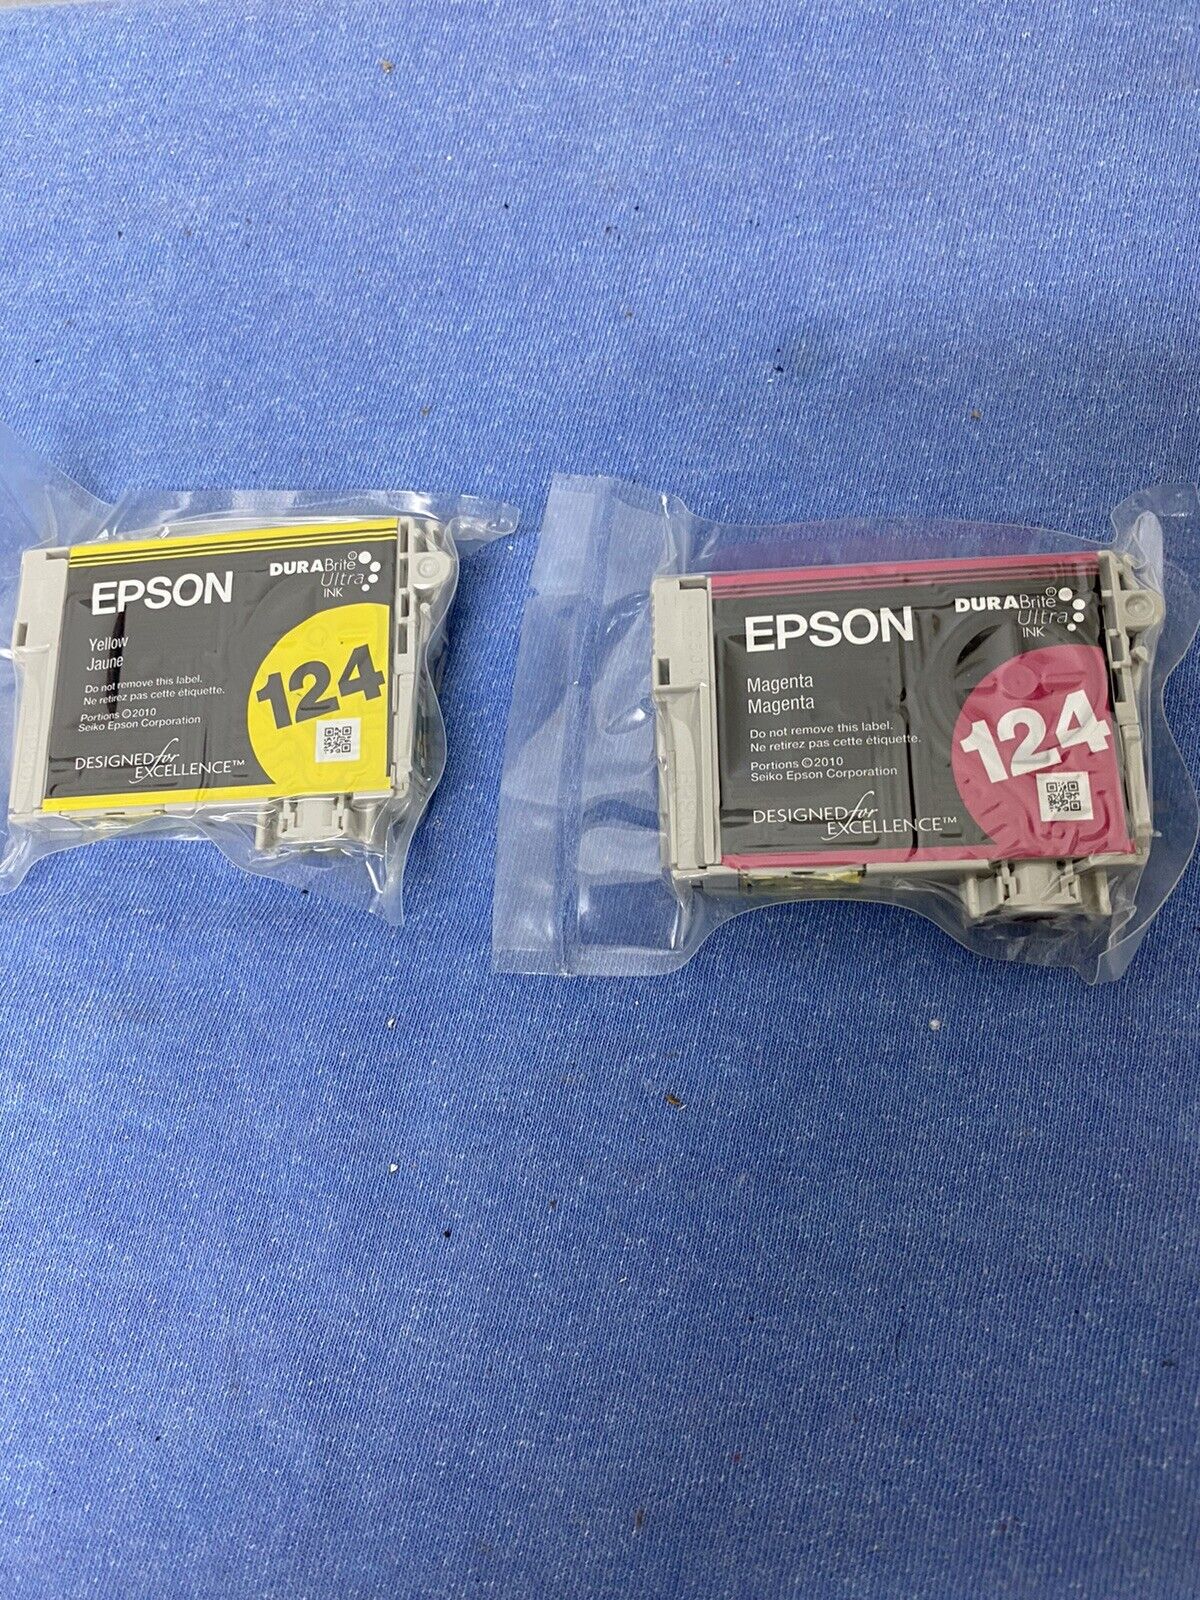 A PAIR OF EPSON GENUINE 124 INK CARTRIDGES ONE YELLOW & ONE MAGENTA